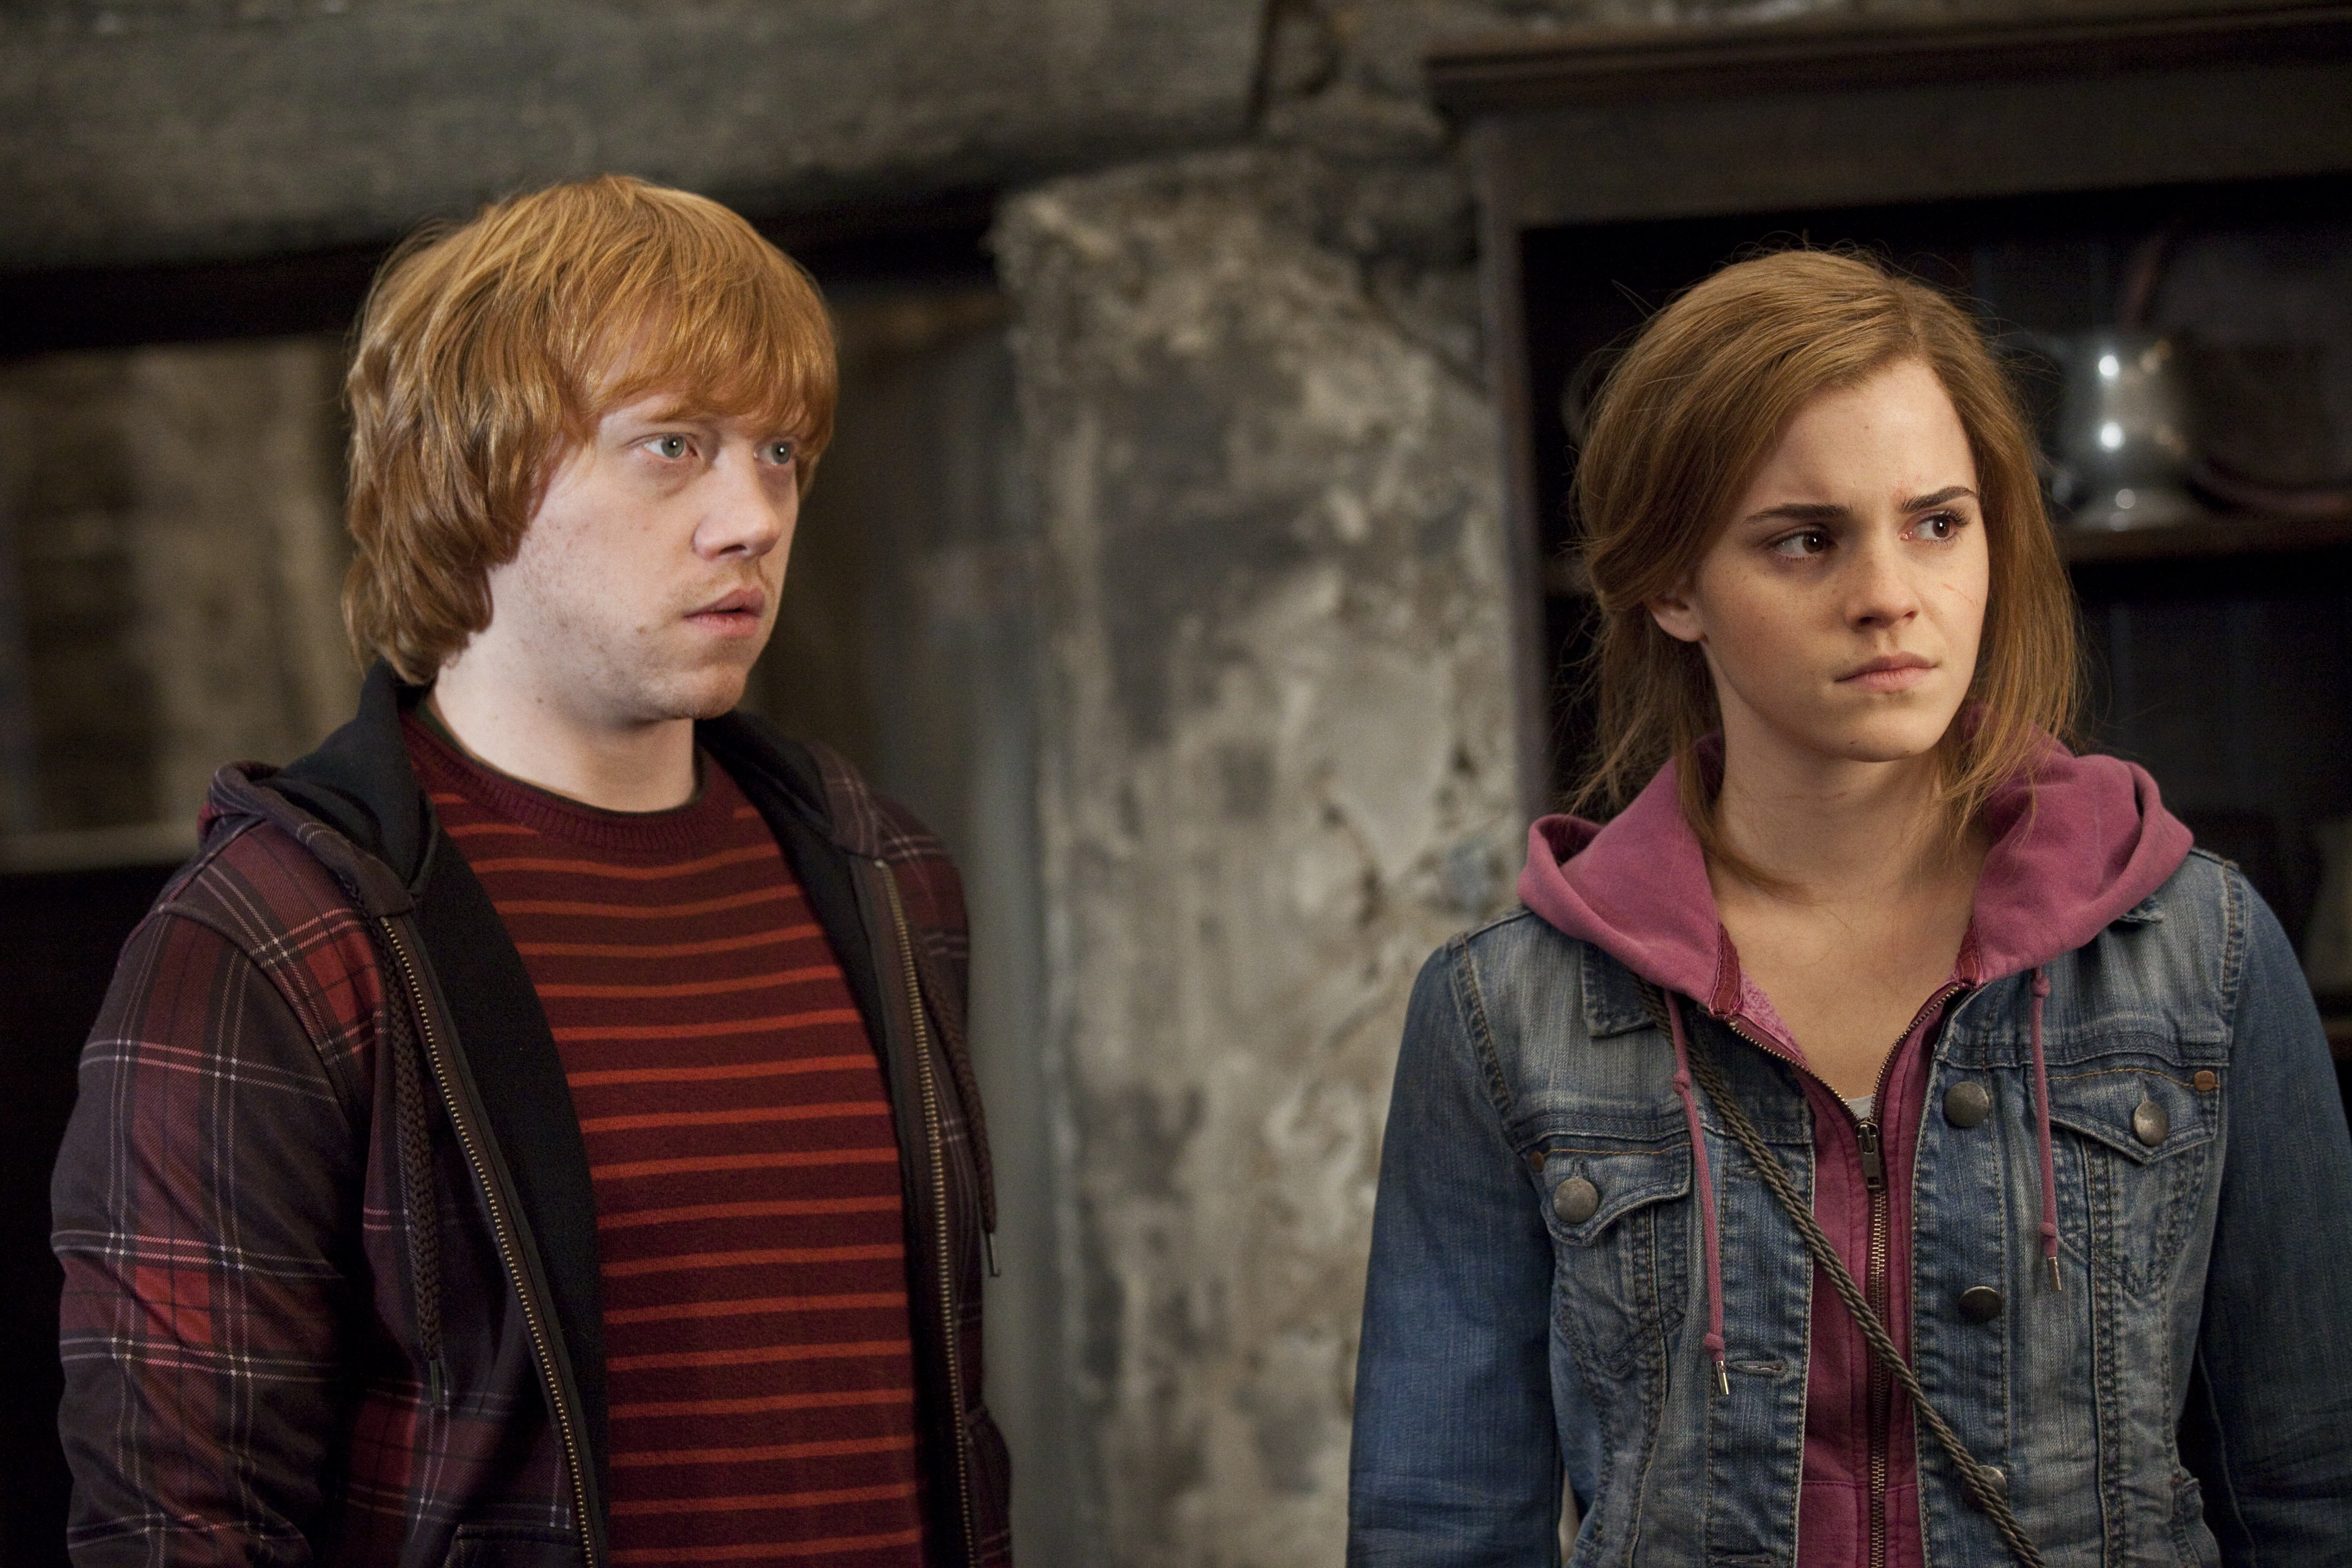 harry potter and the deathly hallows: part 2, harry potter, movie, emma watson, hermione granger, ron weasley, rupert grint